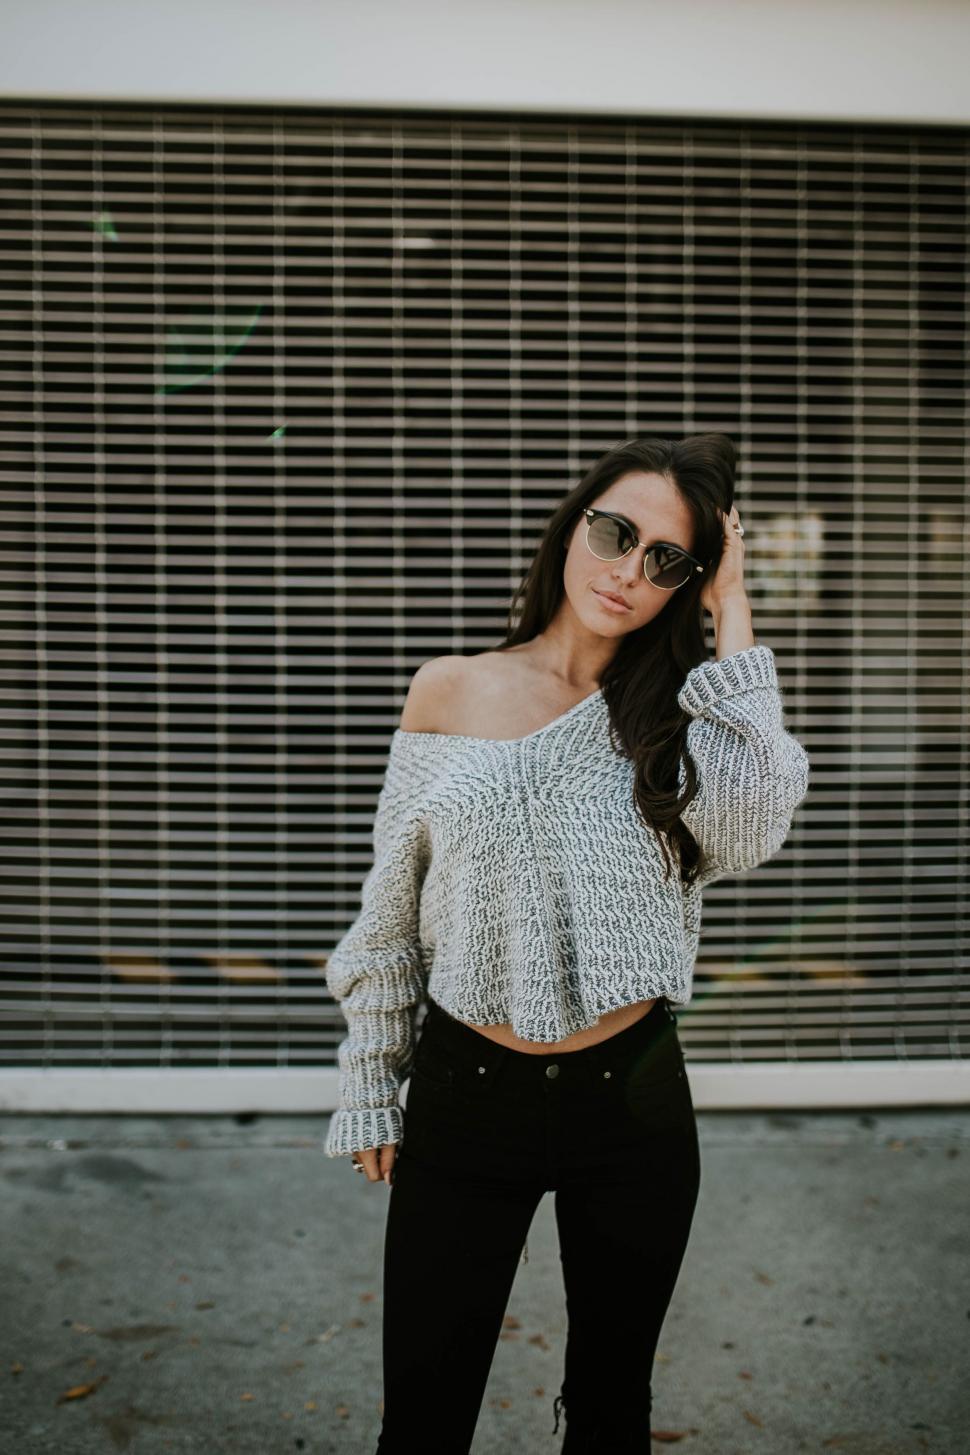 Free Image of Woman Wearing White Sweater and Black Pants 